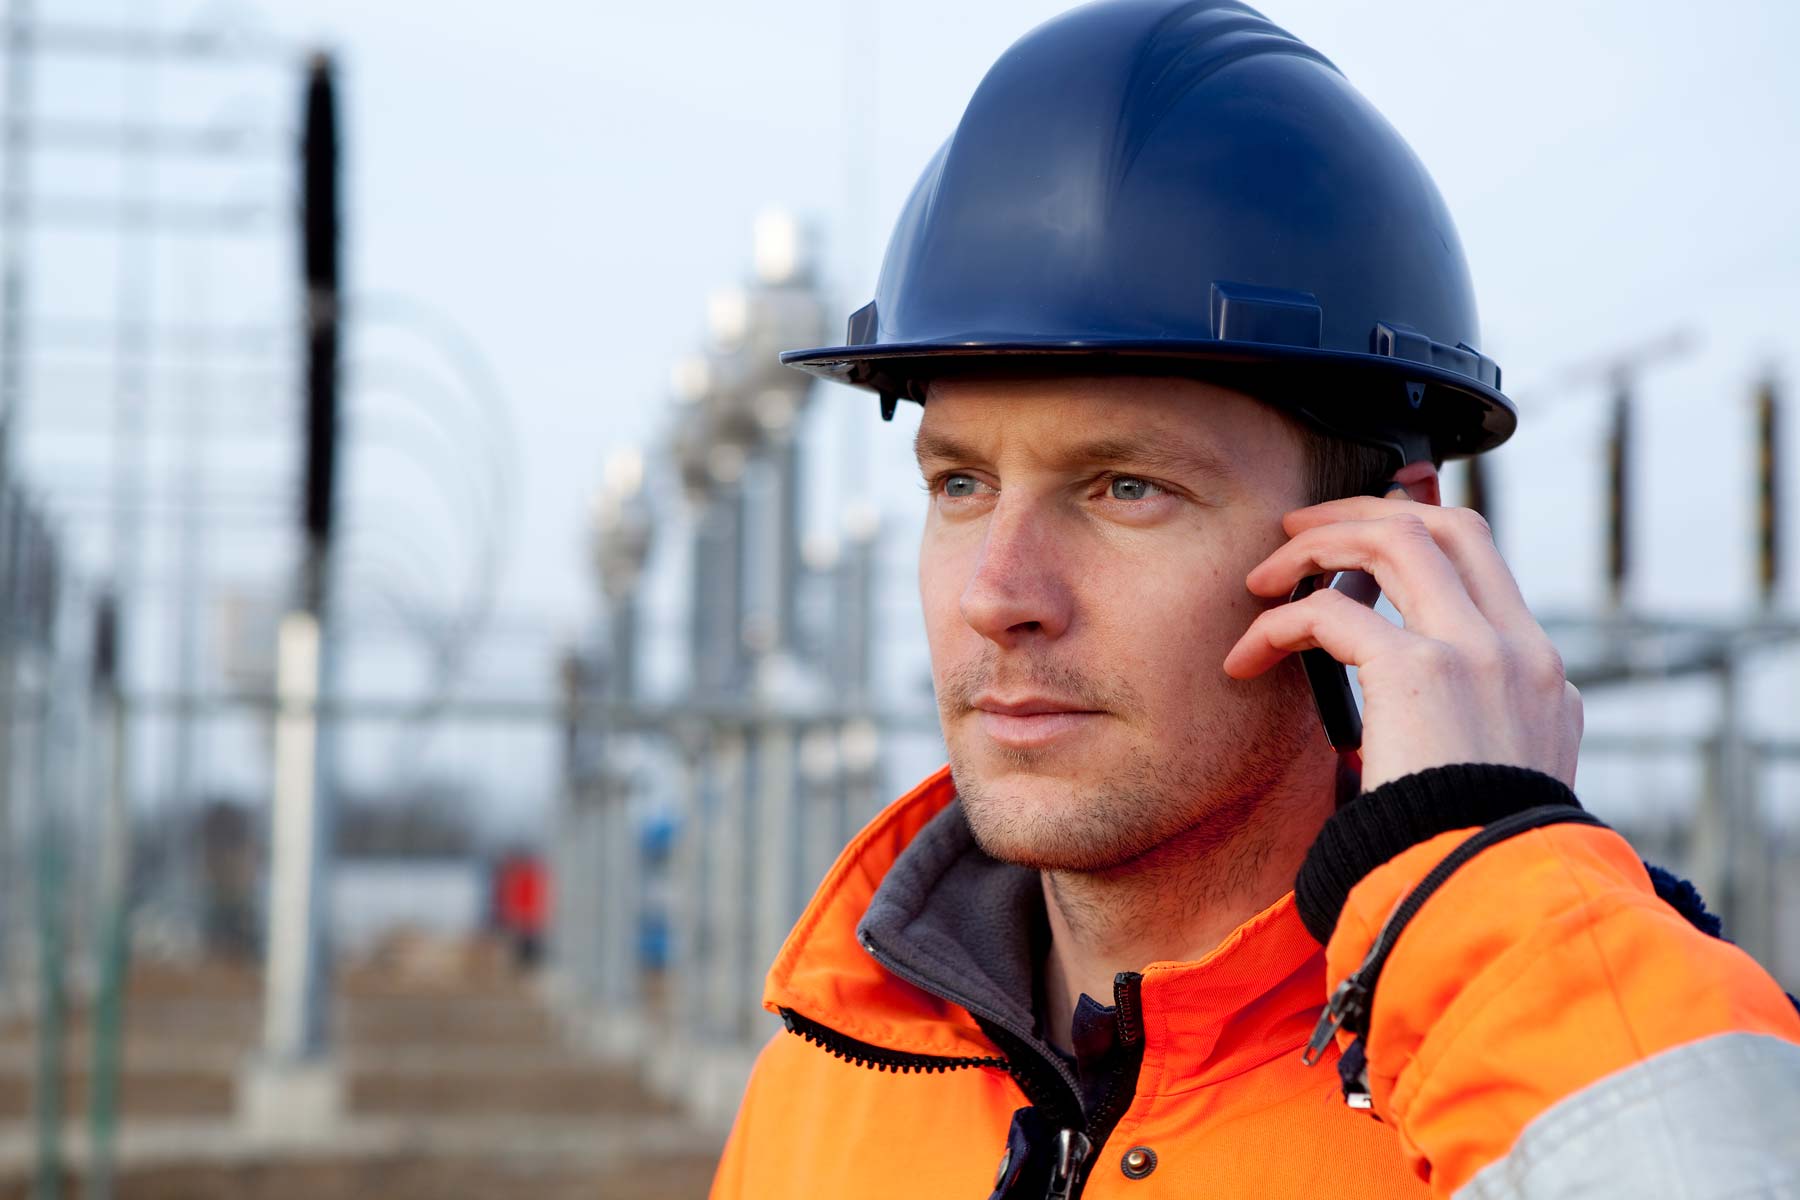 Man in hard hat and safety gear on phone at electric power plant